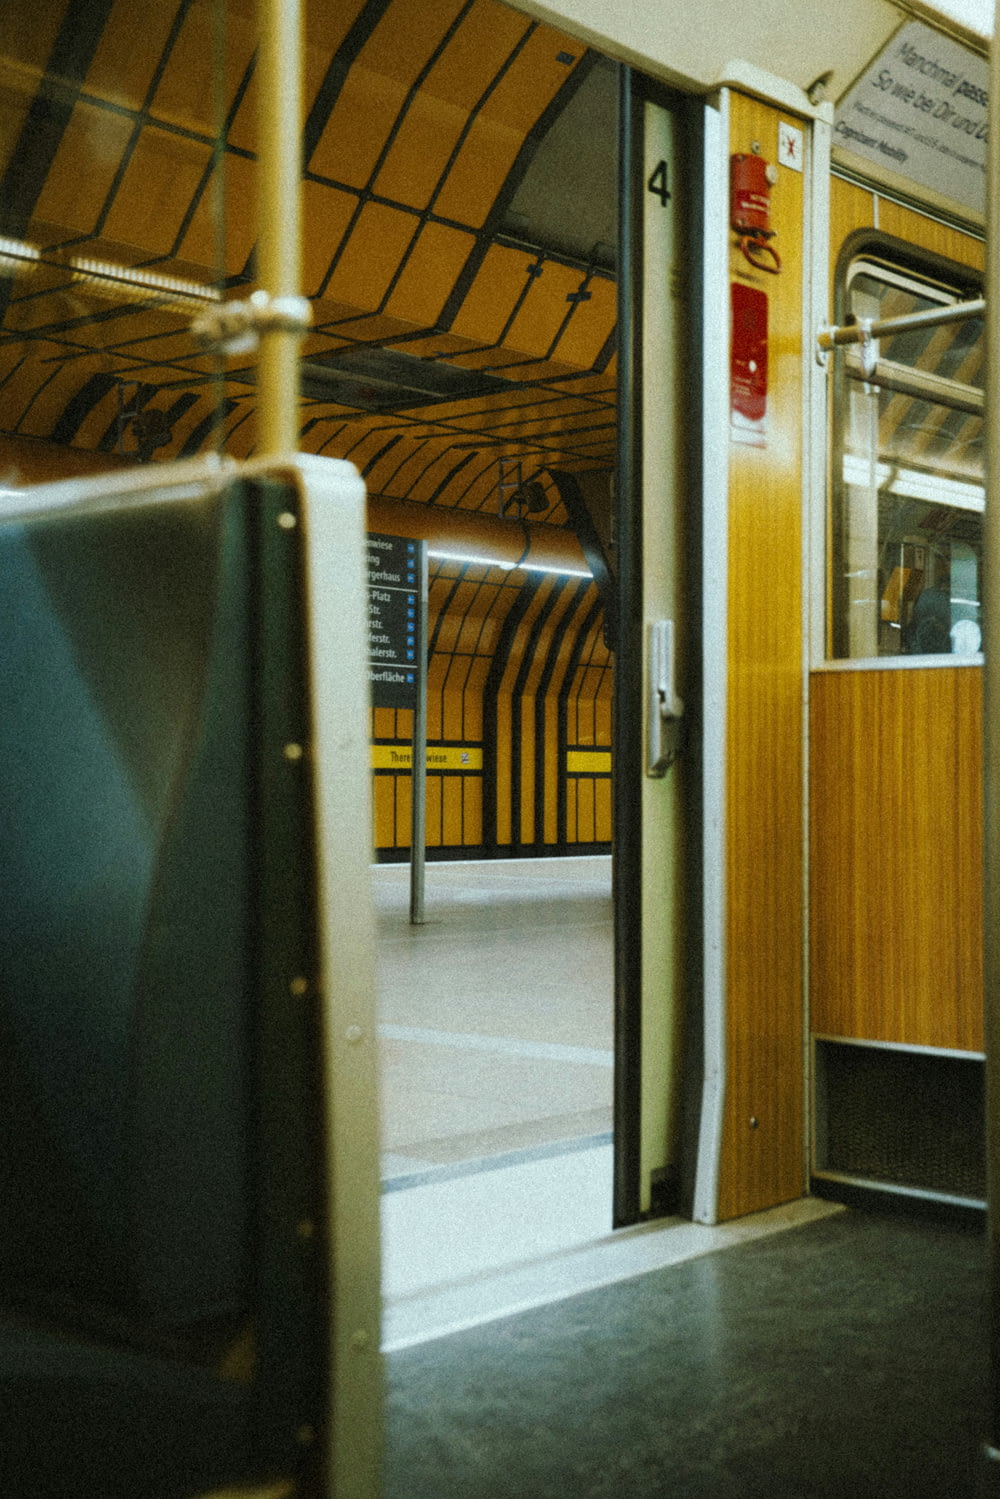 a view of a train's doors from inside the train